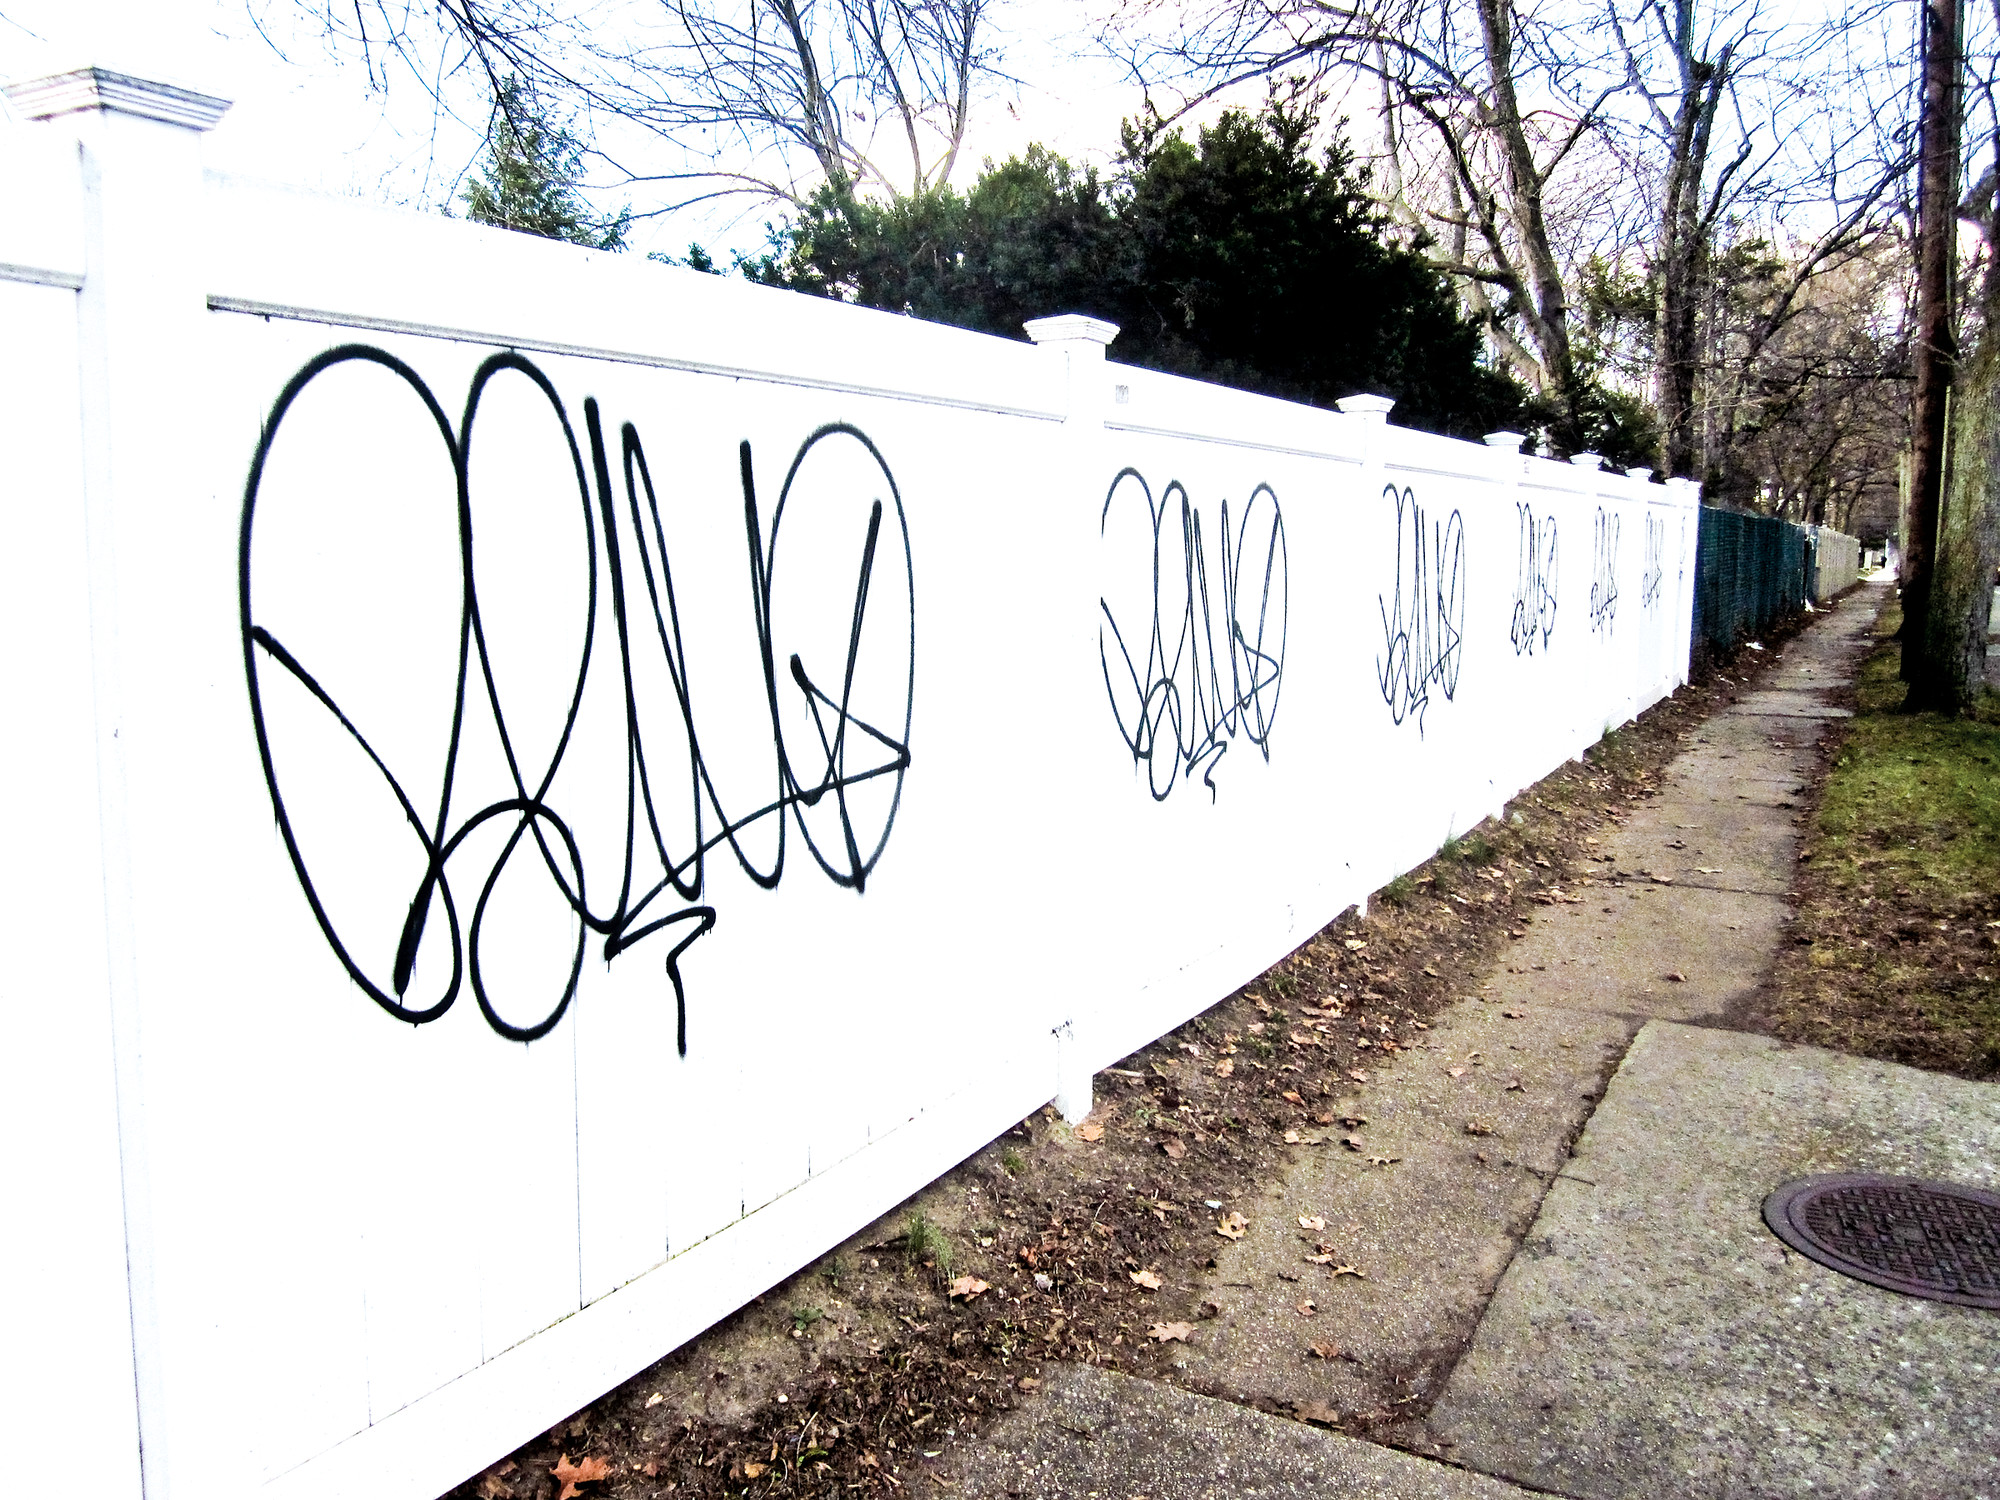 graffiti, a common sight on Merrick Avenue, here on a residential fence between Kalda Lane and Mitchell Avenue.